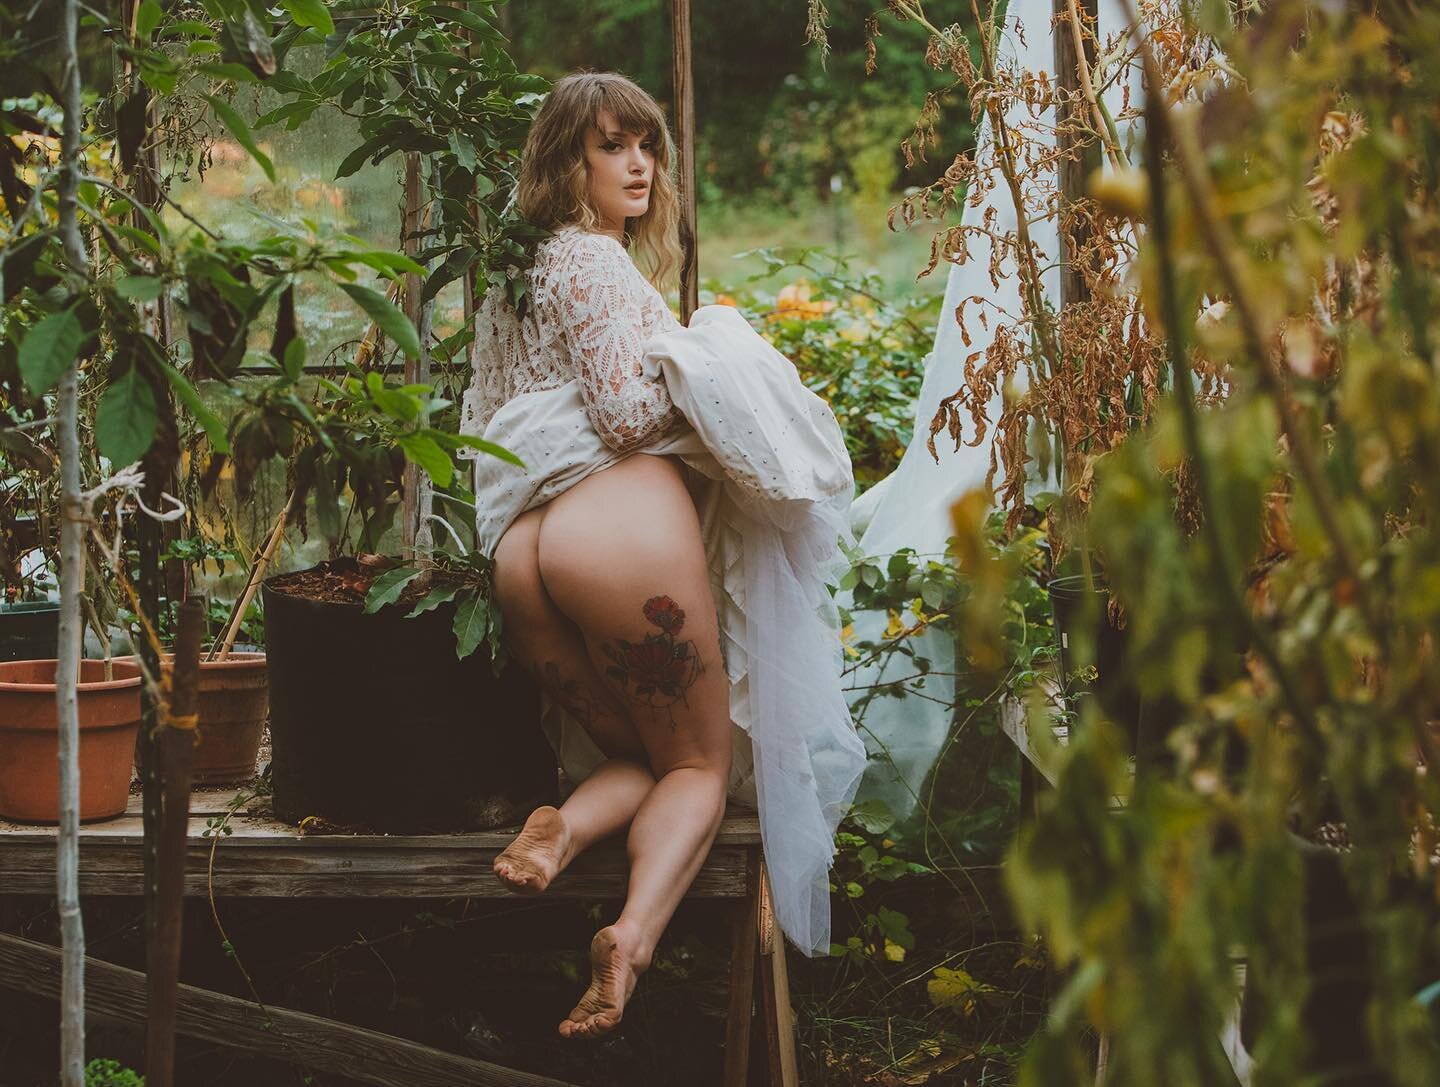 P E A R L ~
.
.
It was an honor working w/ @corwinprescott while in Portland 🌿 We brought out the vintage vibes, and it was an incredible experience 🍃 So unbelievably talented and a down-to-earth person! His work is to die for 😭
.
.
This beautiful